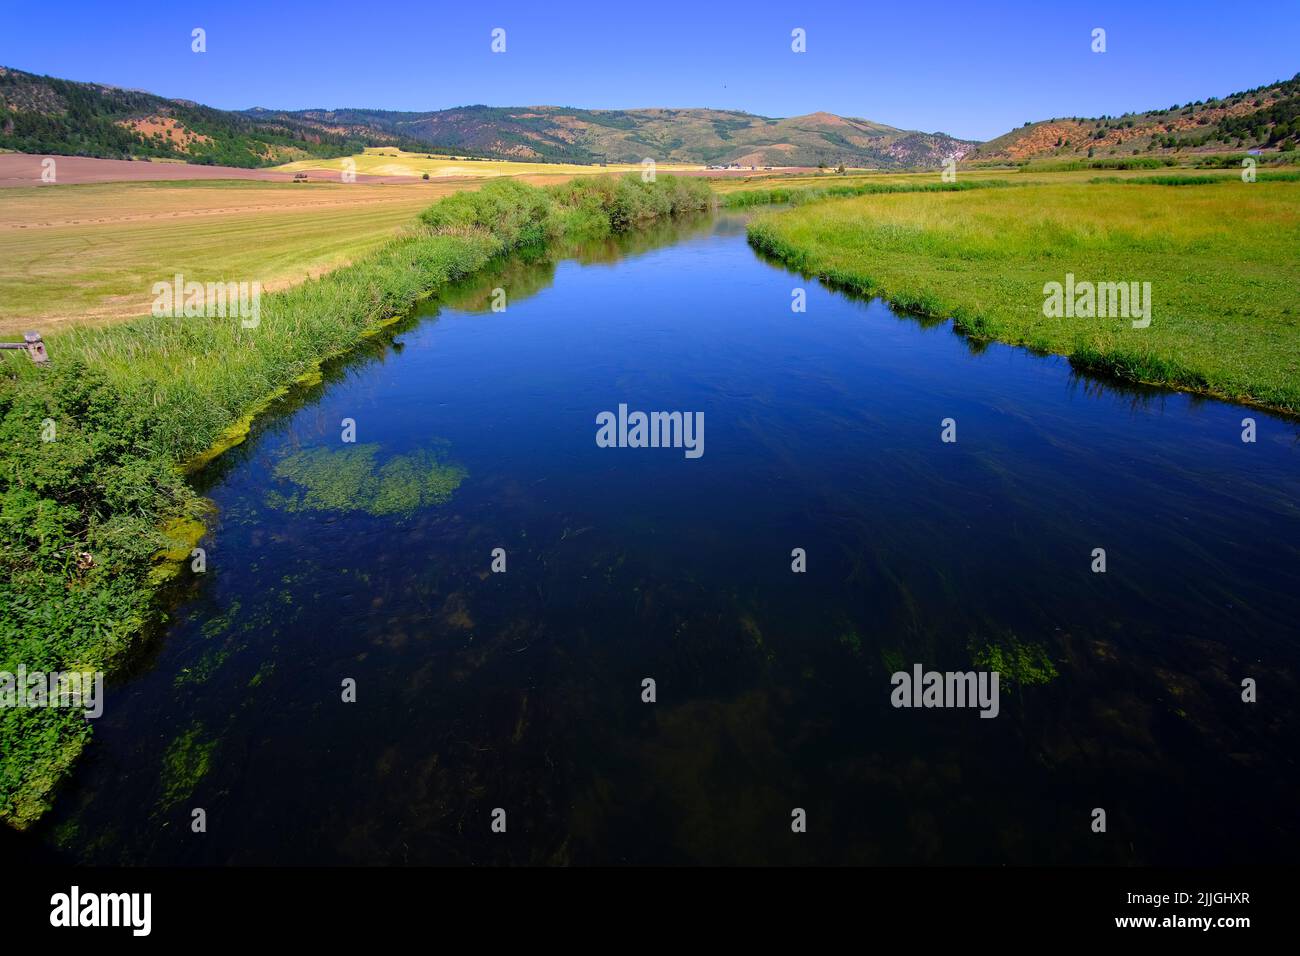 Blue strea or river of flowing water in valley reflecting blue sky and clouds Stock Photo